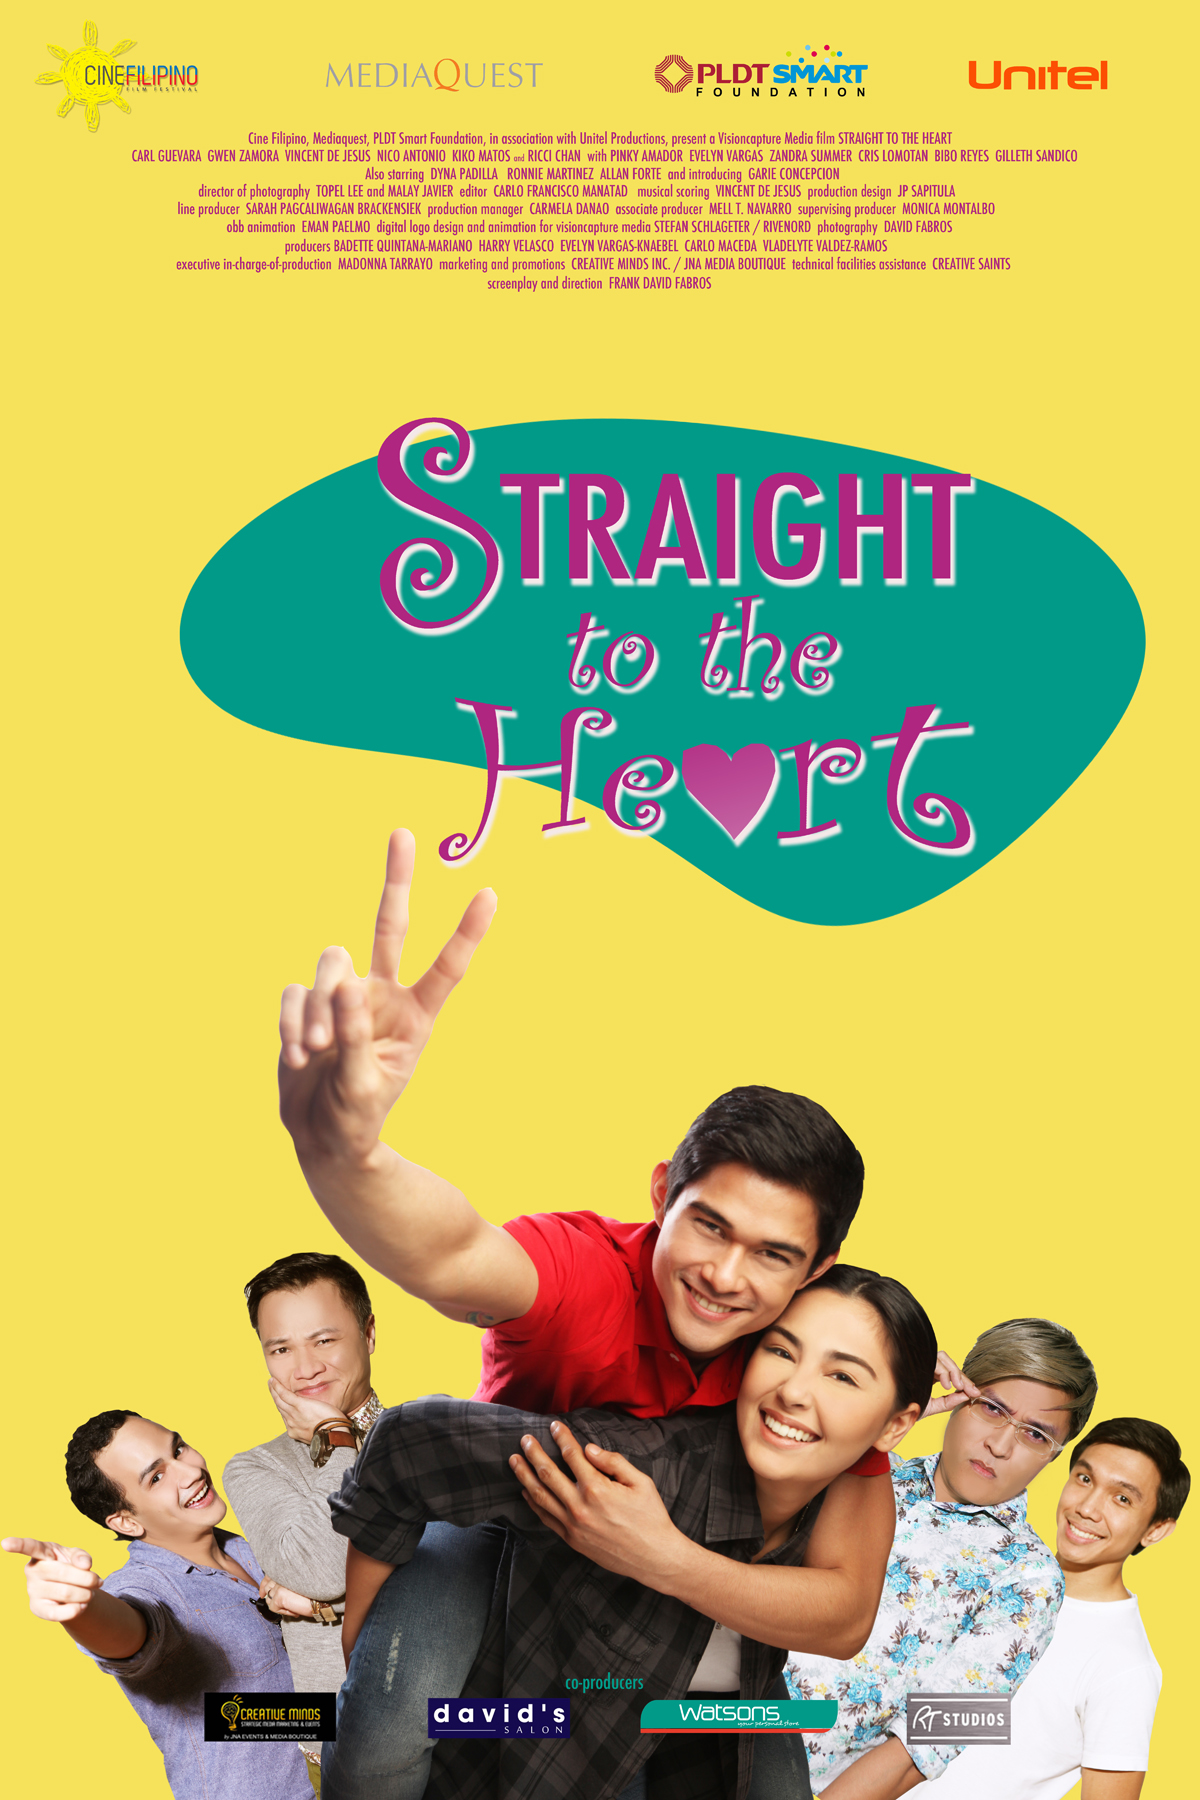 Unofficial poster of the full feature film STRAIGHT TO THE HEART, to be released in March 2016, by CineFilipino.